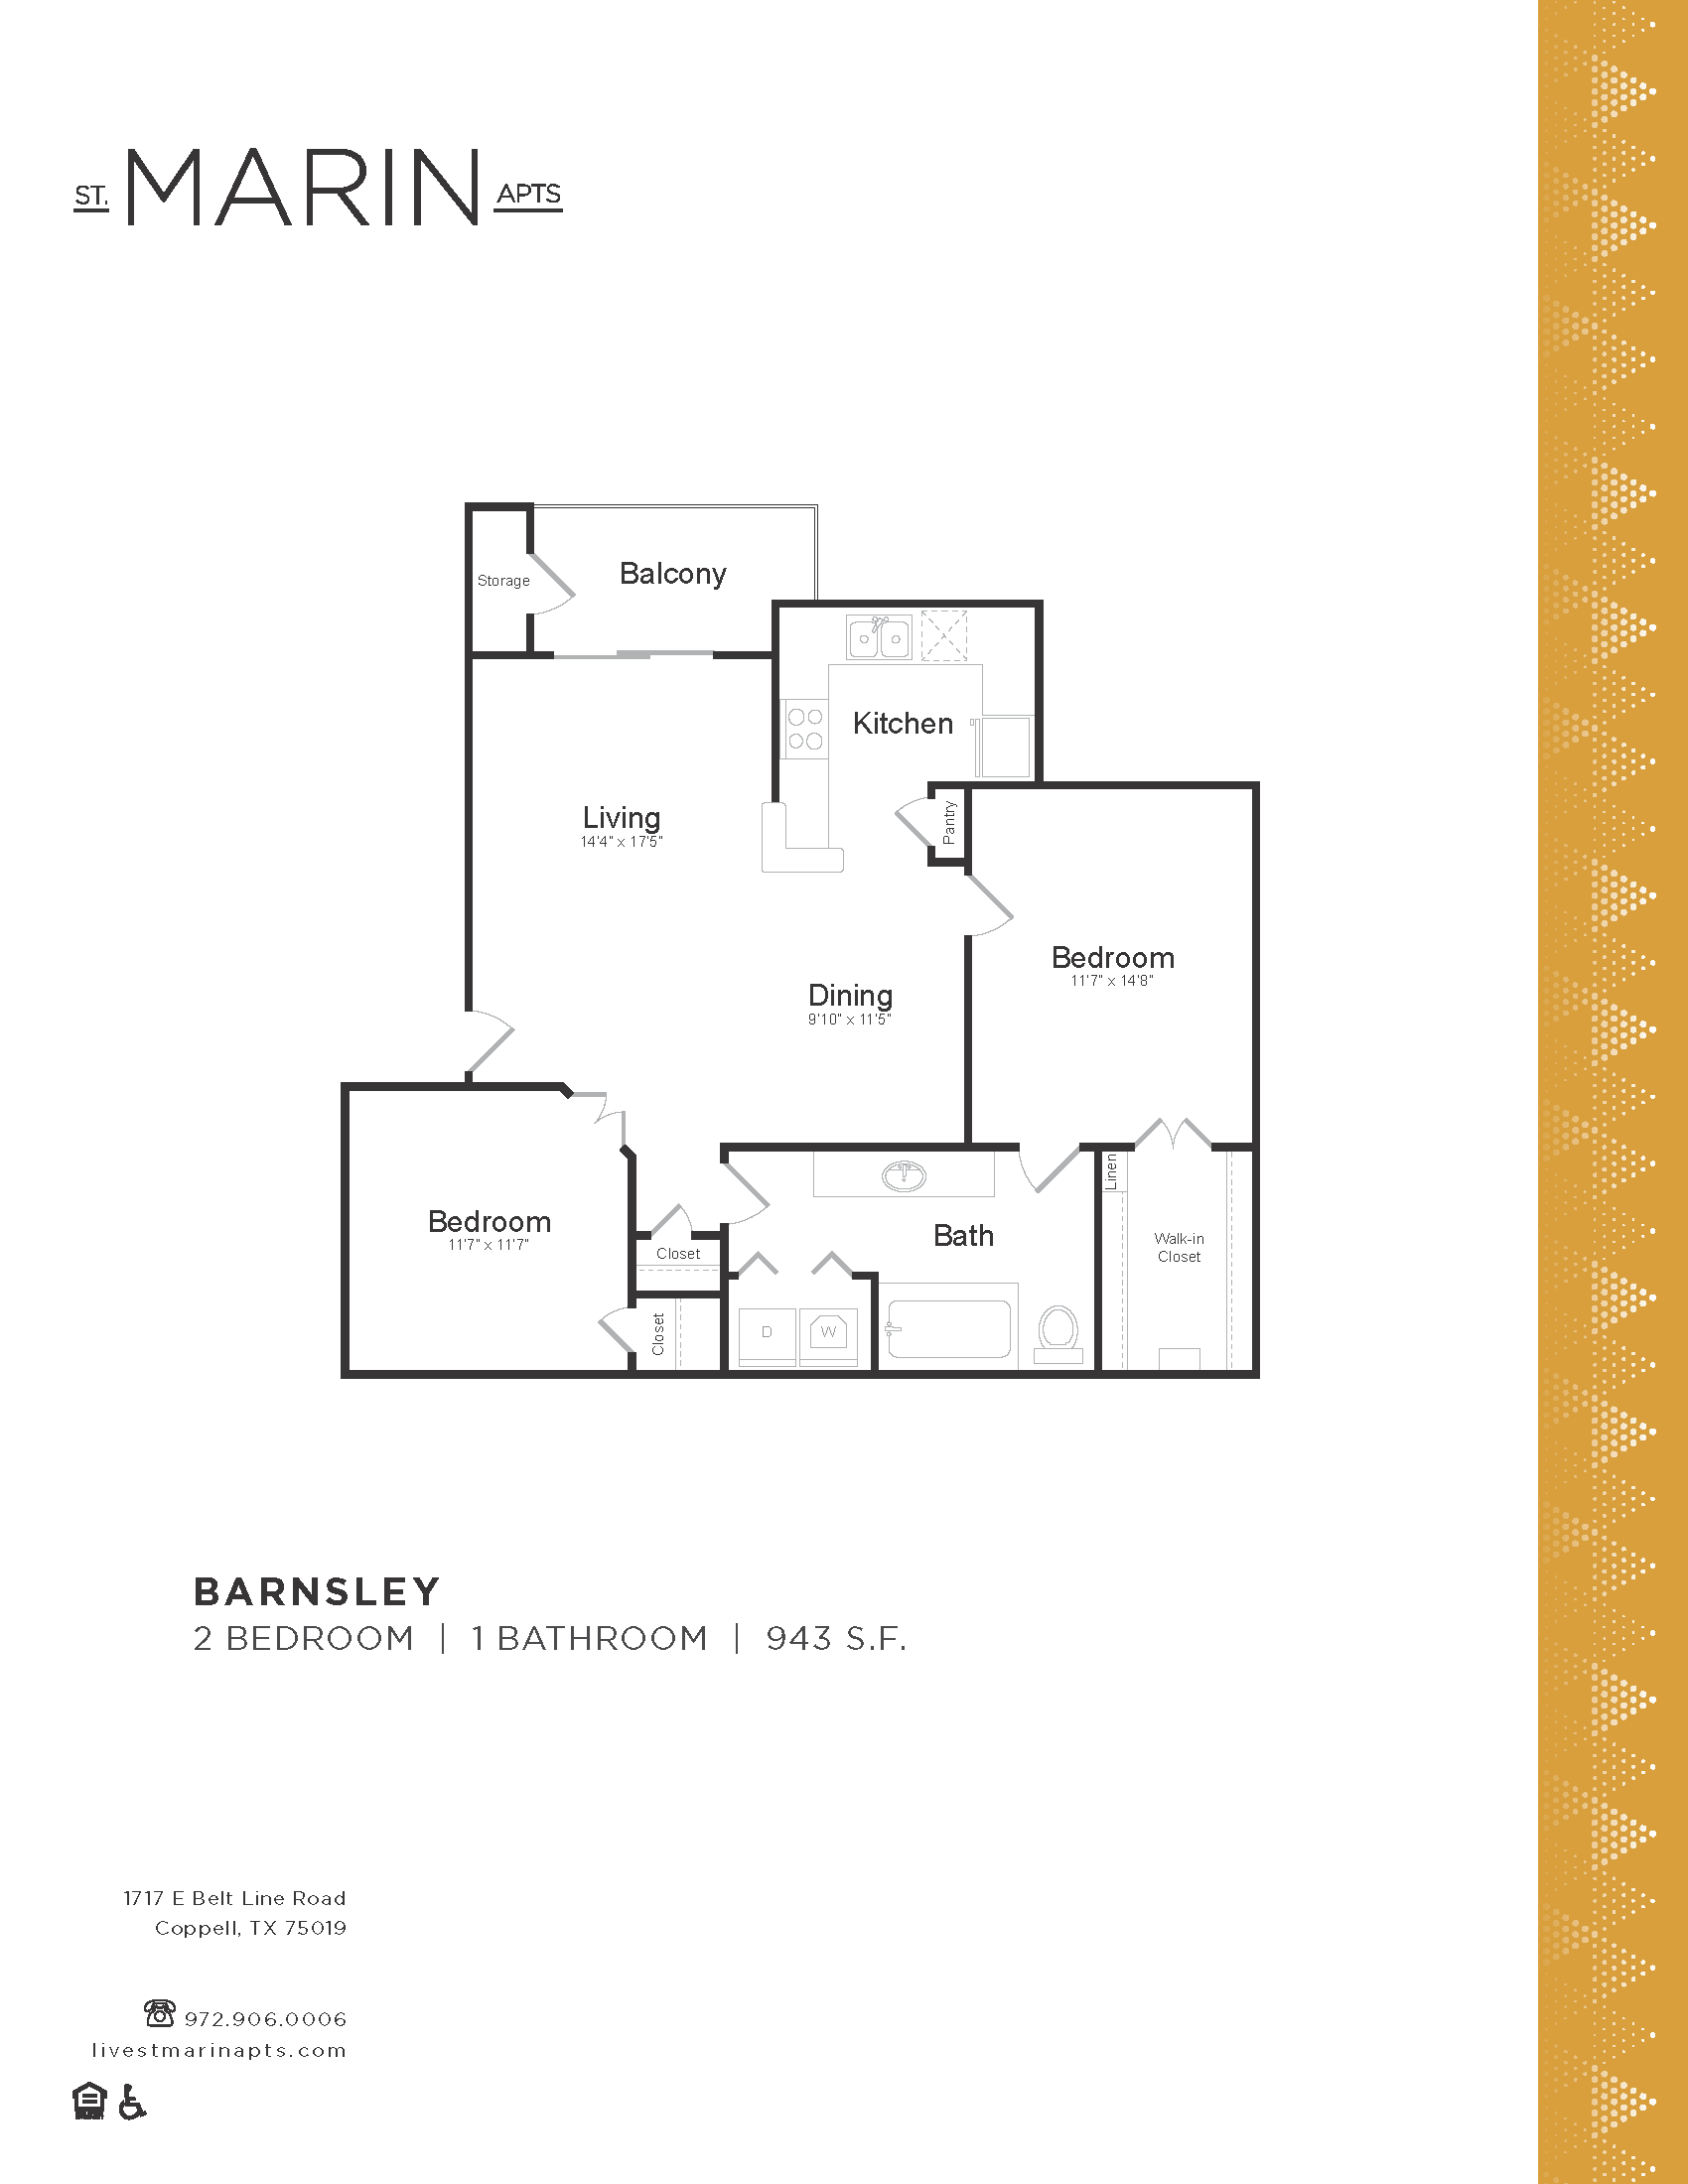 Floor Plans of St. Marin in Coppell, TX